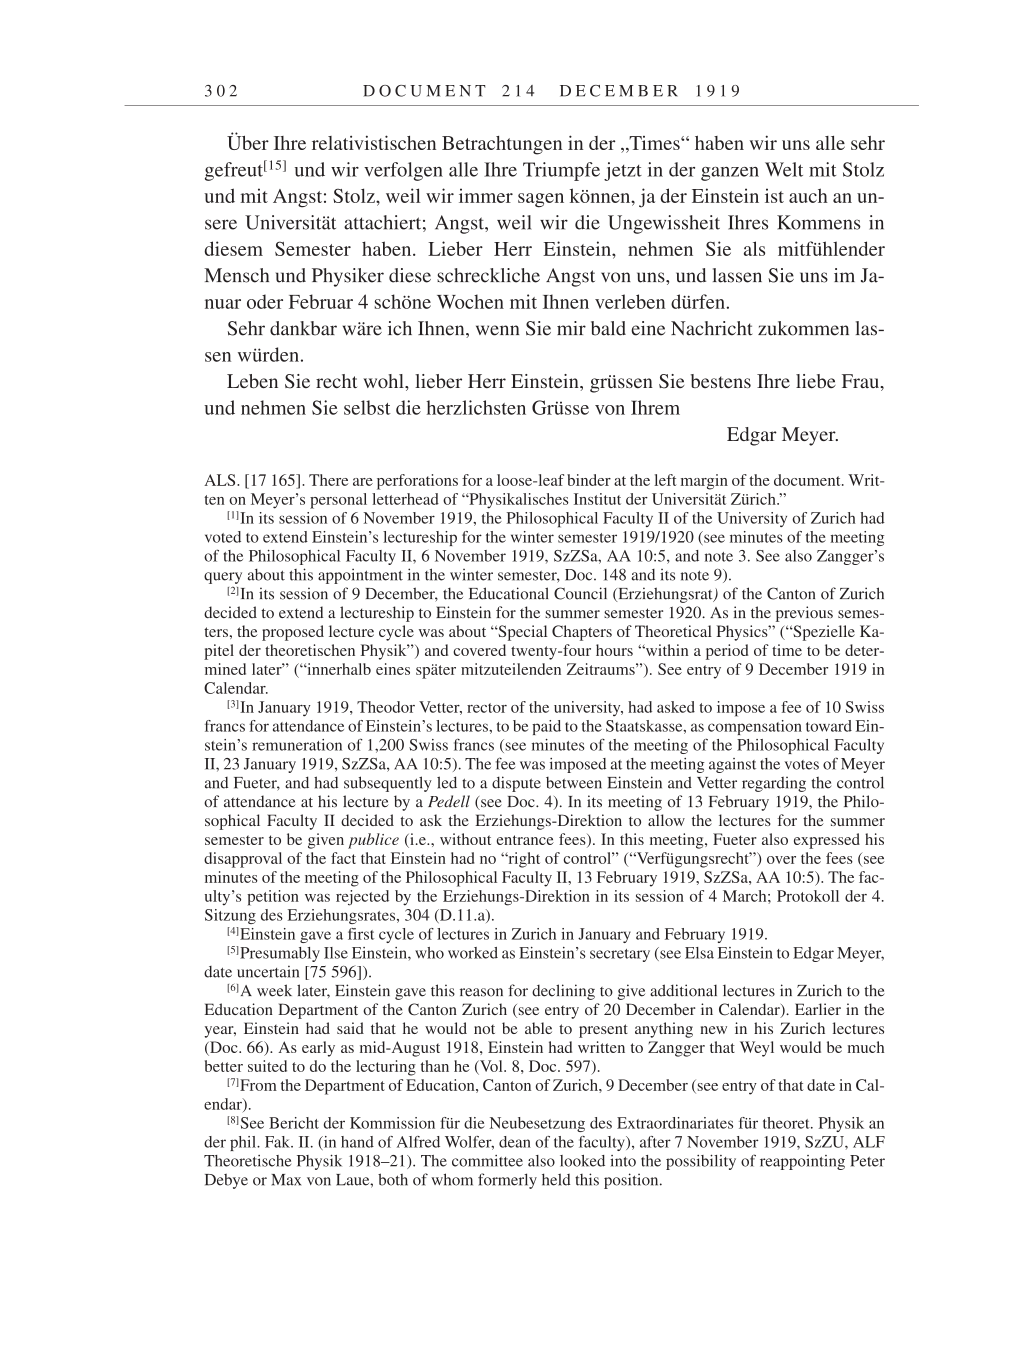 Volume 9: The Berlin Years: Correspondence January 1919-April 1920 page 302